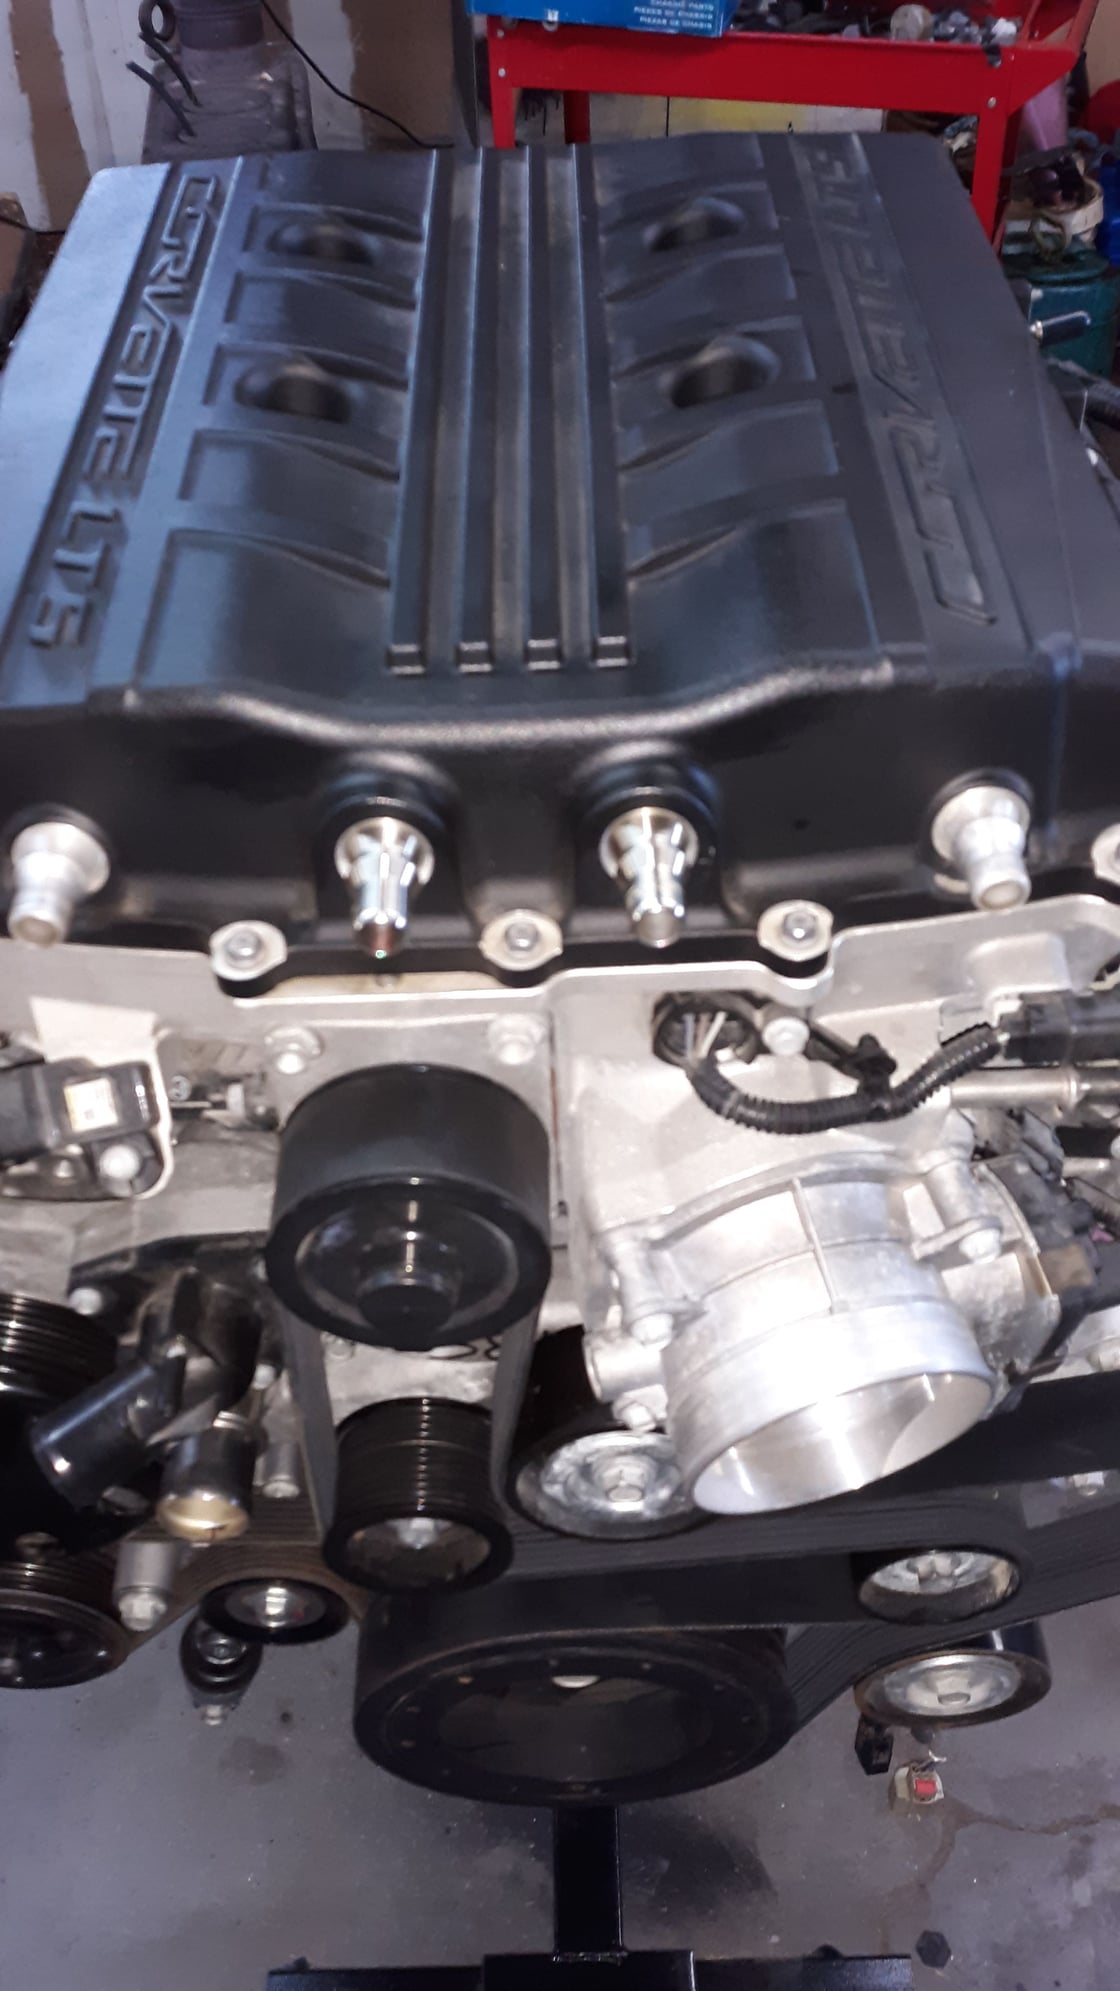 Engine - Complete - 2019 CORVETTE ZR1 LT5 motor with 9k miles in excellent condition $24,500. - Used - 2019 Chevrolet Corvette - Springfield, MO 65810, United States